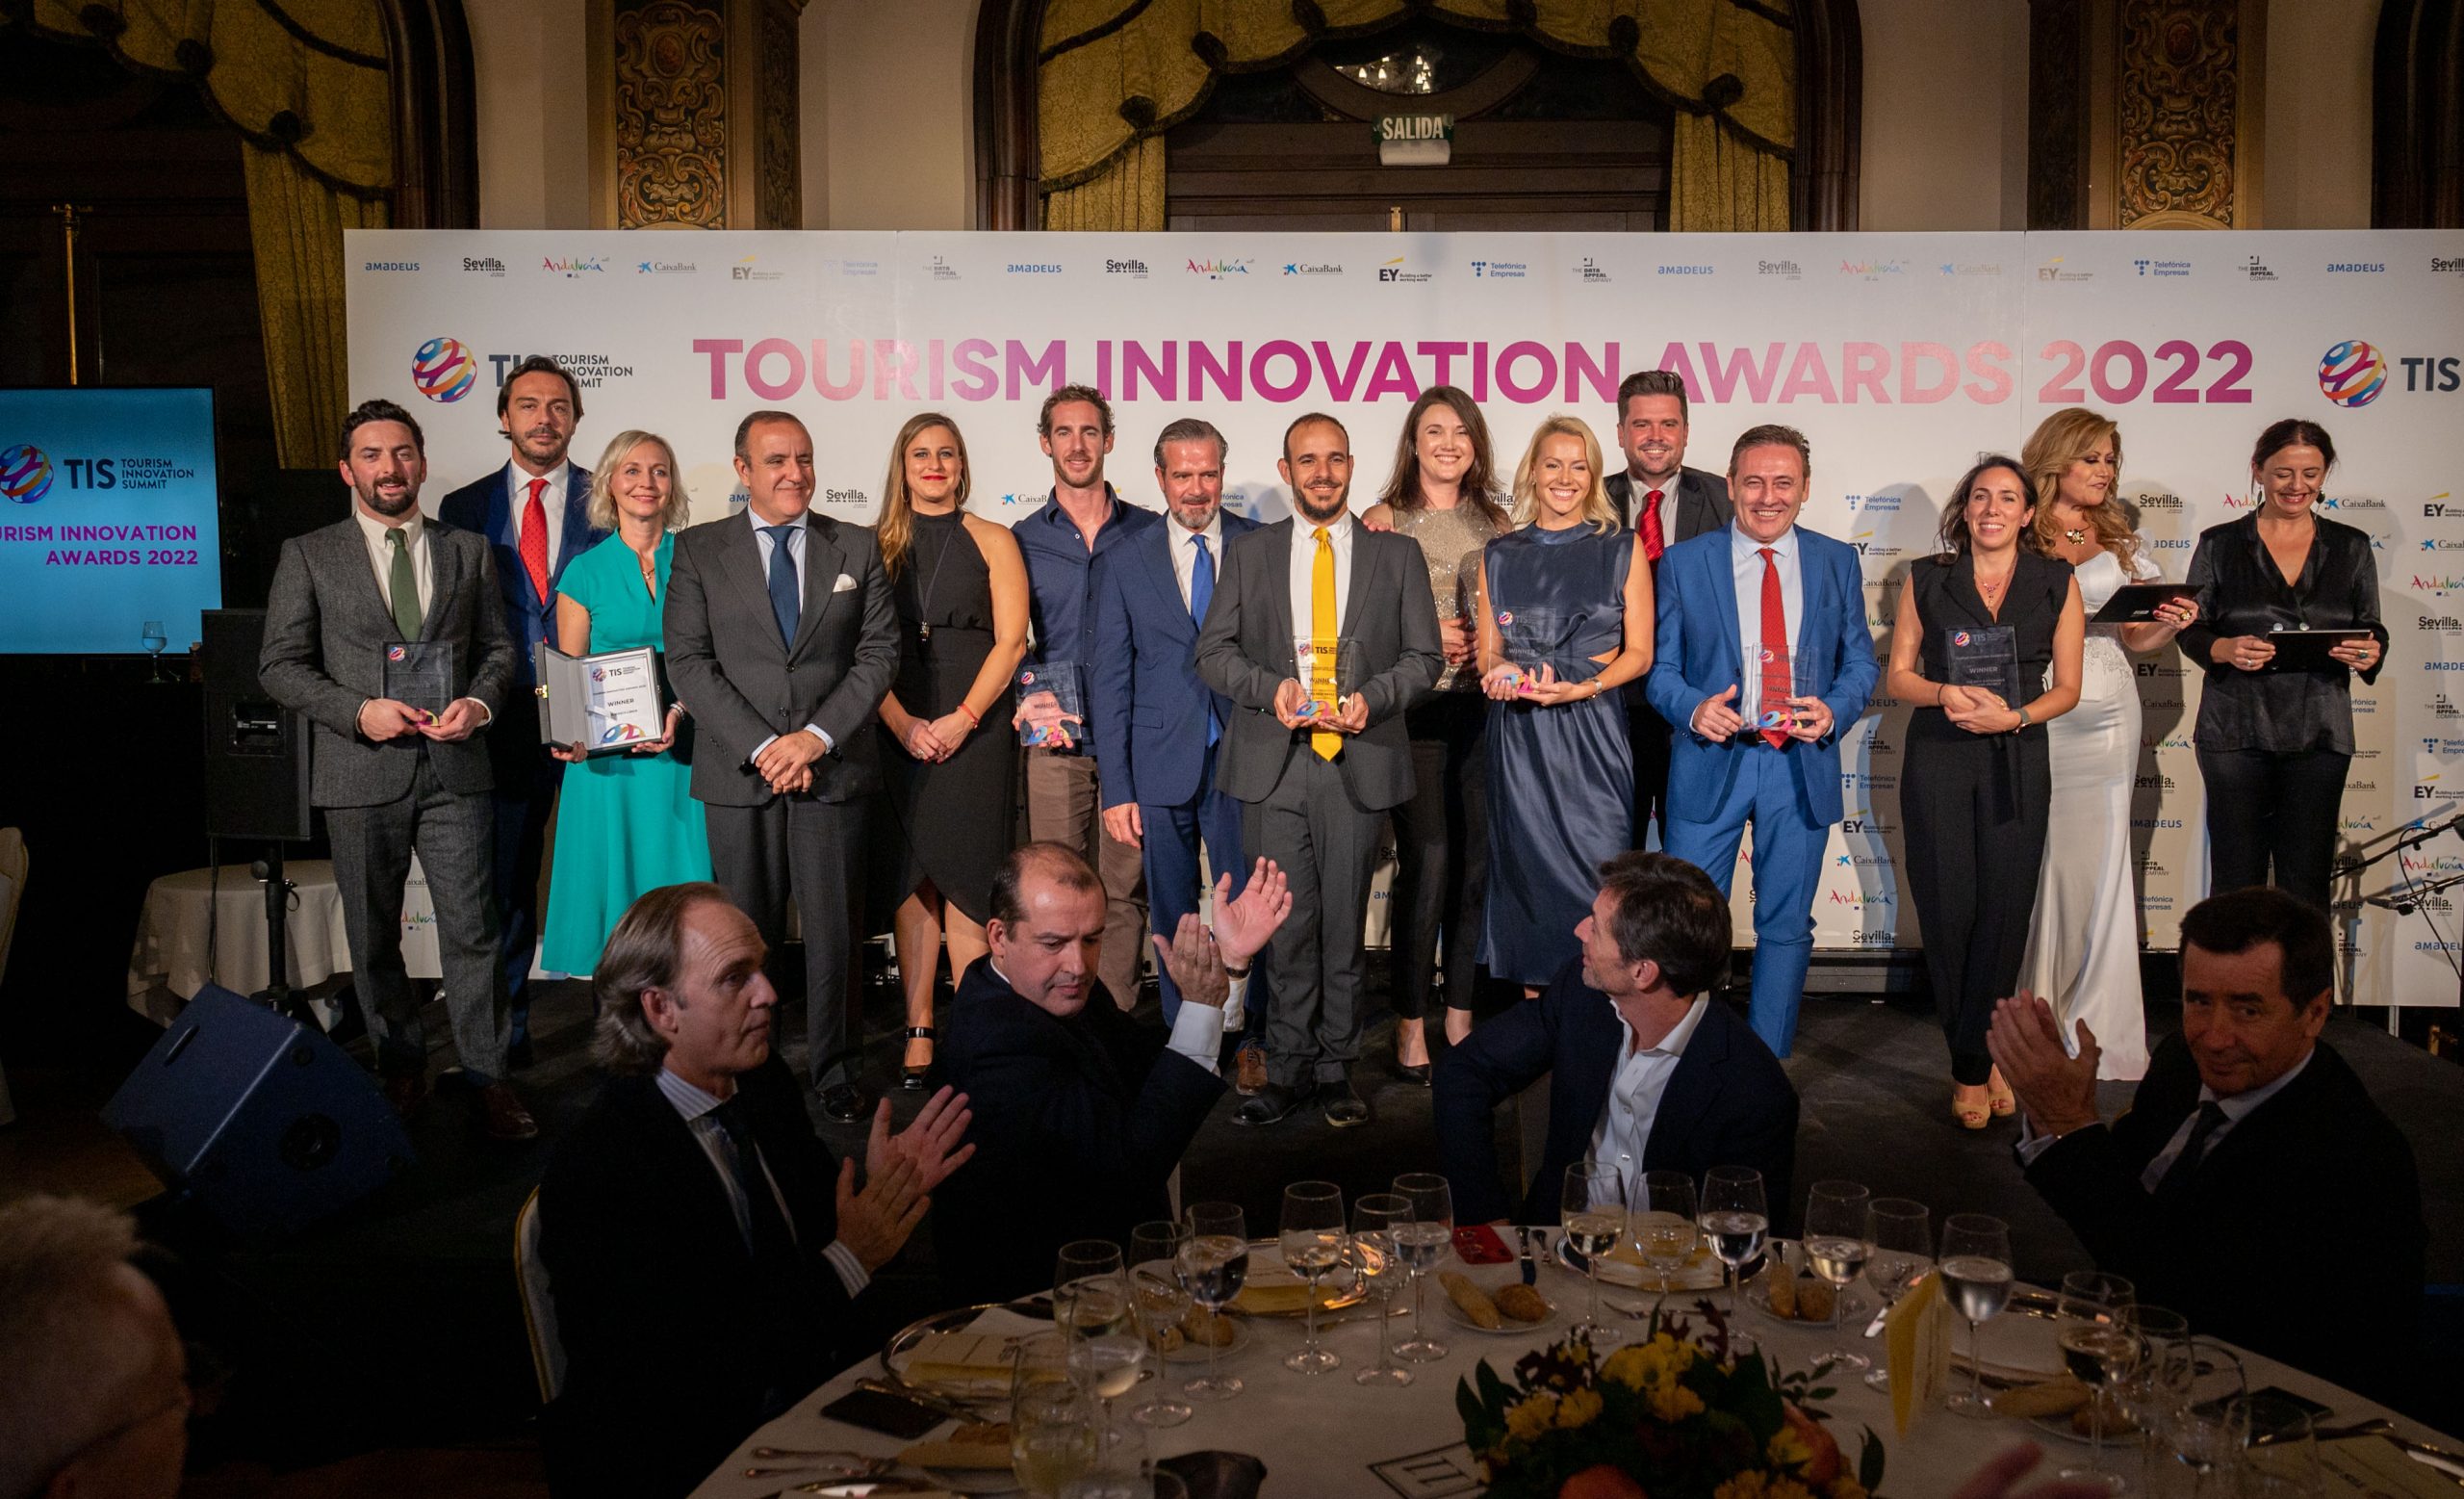 Finland, Dublin, Vueling and Casa Batlló, winners of the Tourism Innovation Awards 2022